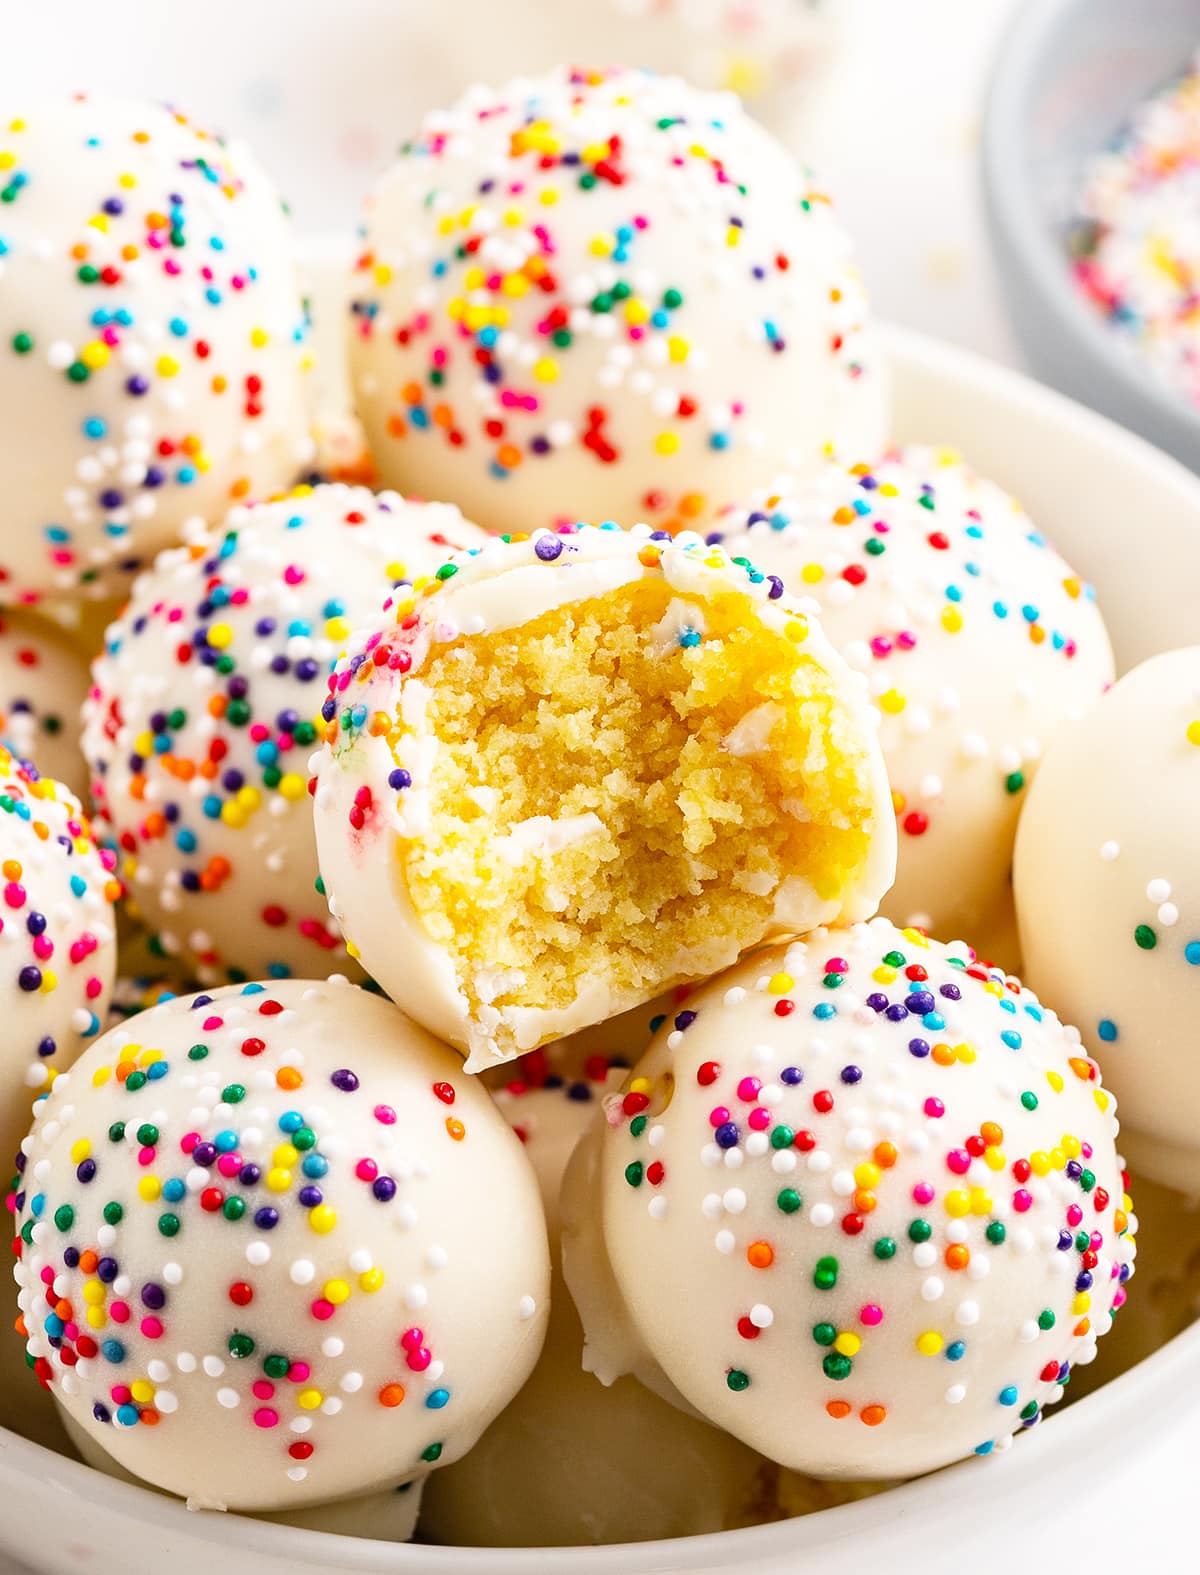 A bowl of cake balls, one has a bite out of it showing the yellow cake in the middle.